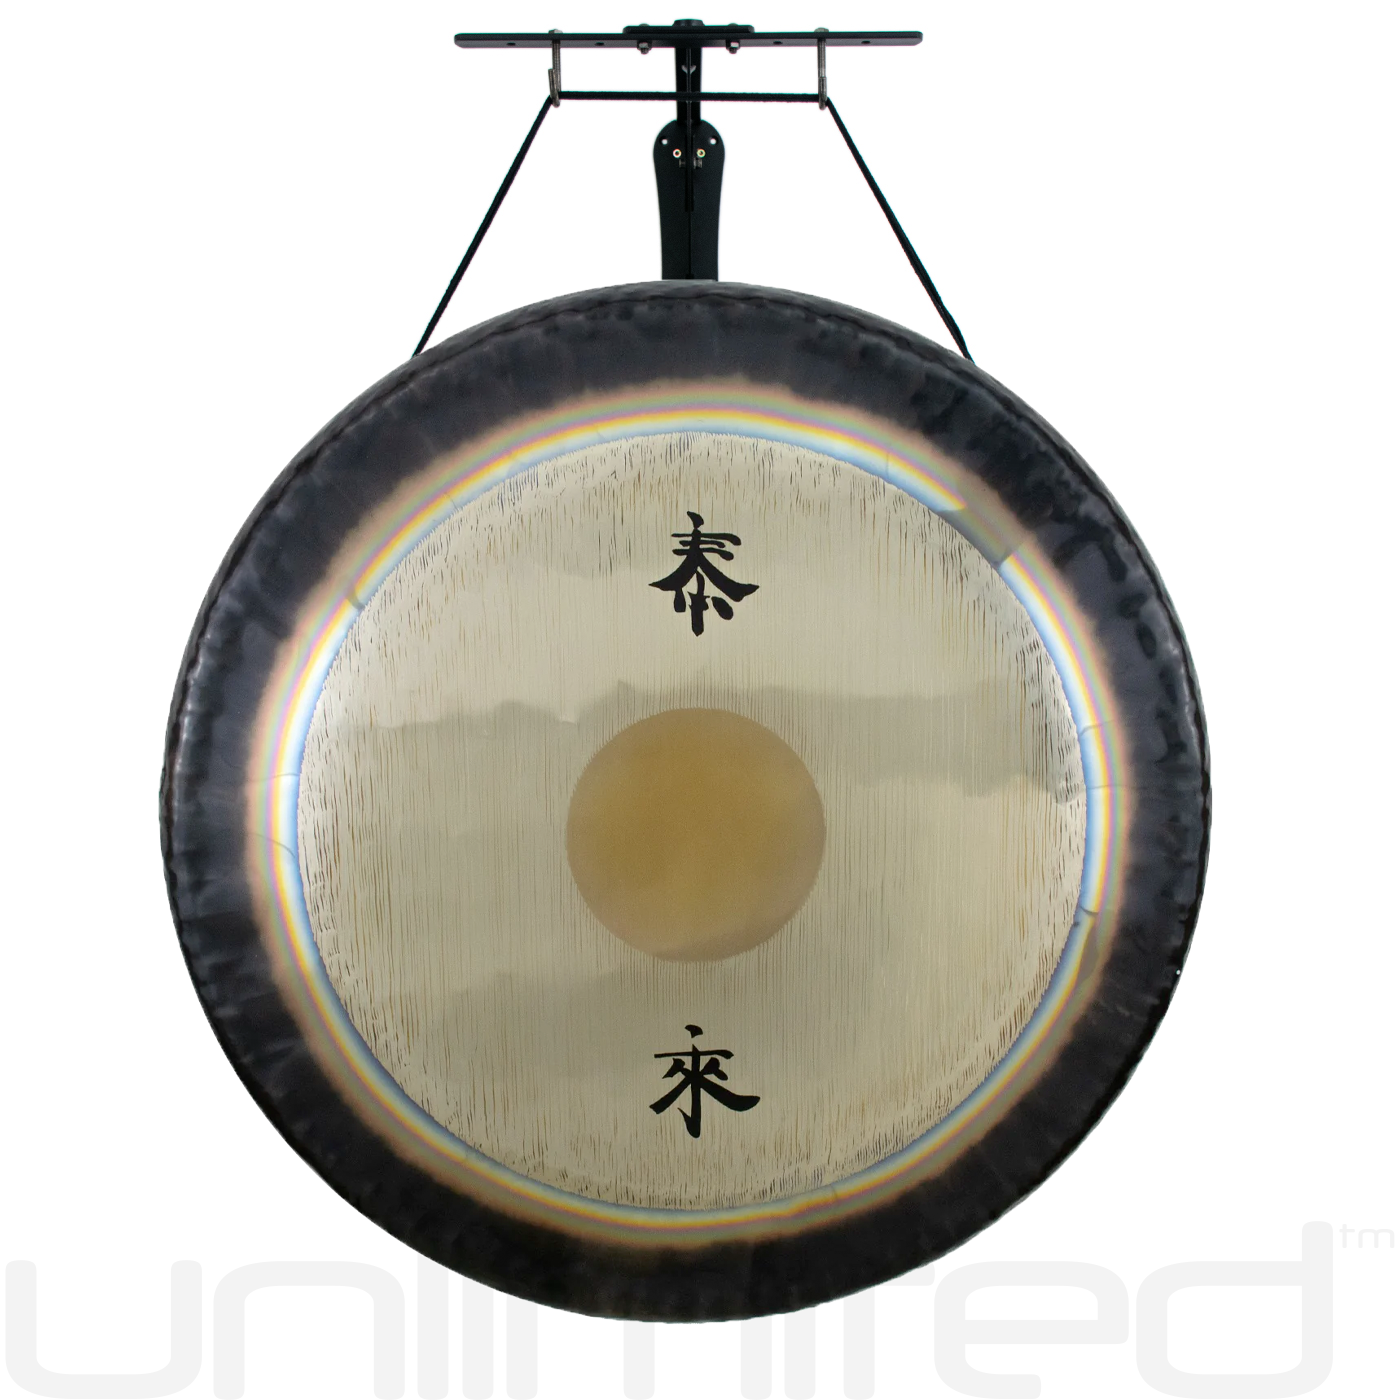 Gongs for Sale - High Quality Gongs - The Gong Shop